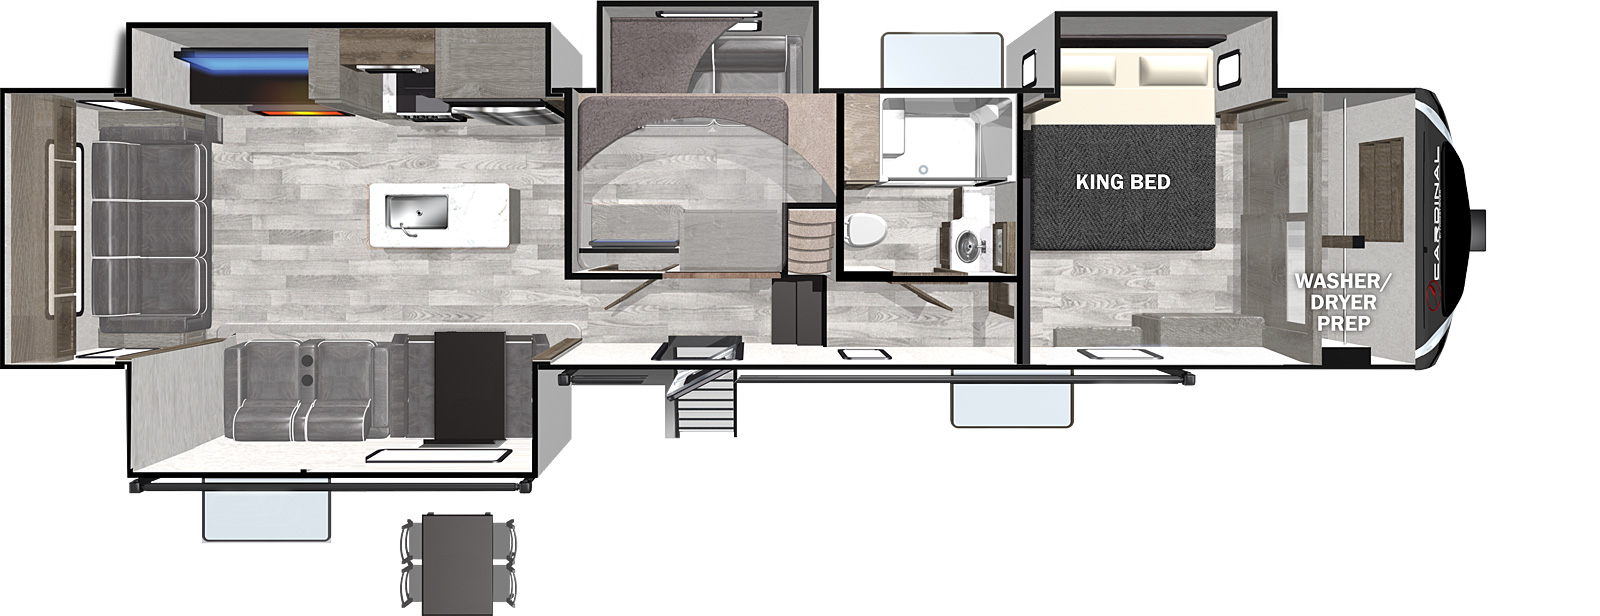 The 379MBLE has four slideouts and one entry. Interior layout front to back: bedroom with king bed slideout and washer/dryer prep; off-door side aisle bathroom; mid bunk with loft above; off-door side slideout with kitchen and entertainment center; kitchen island with sink; door side slideout with dinette and seating; rear sofa. Optional free-standing dinette.